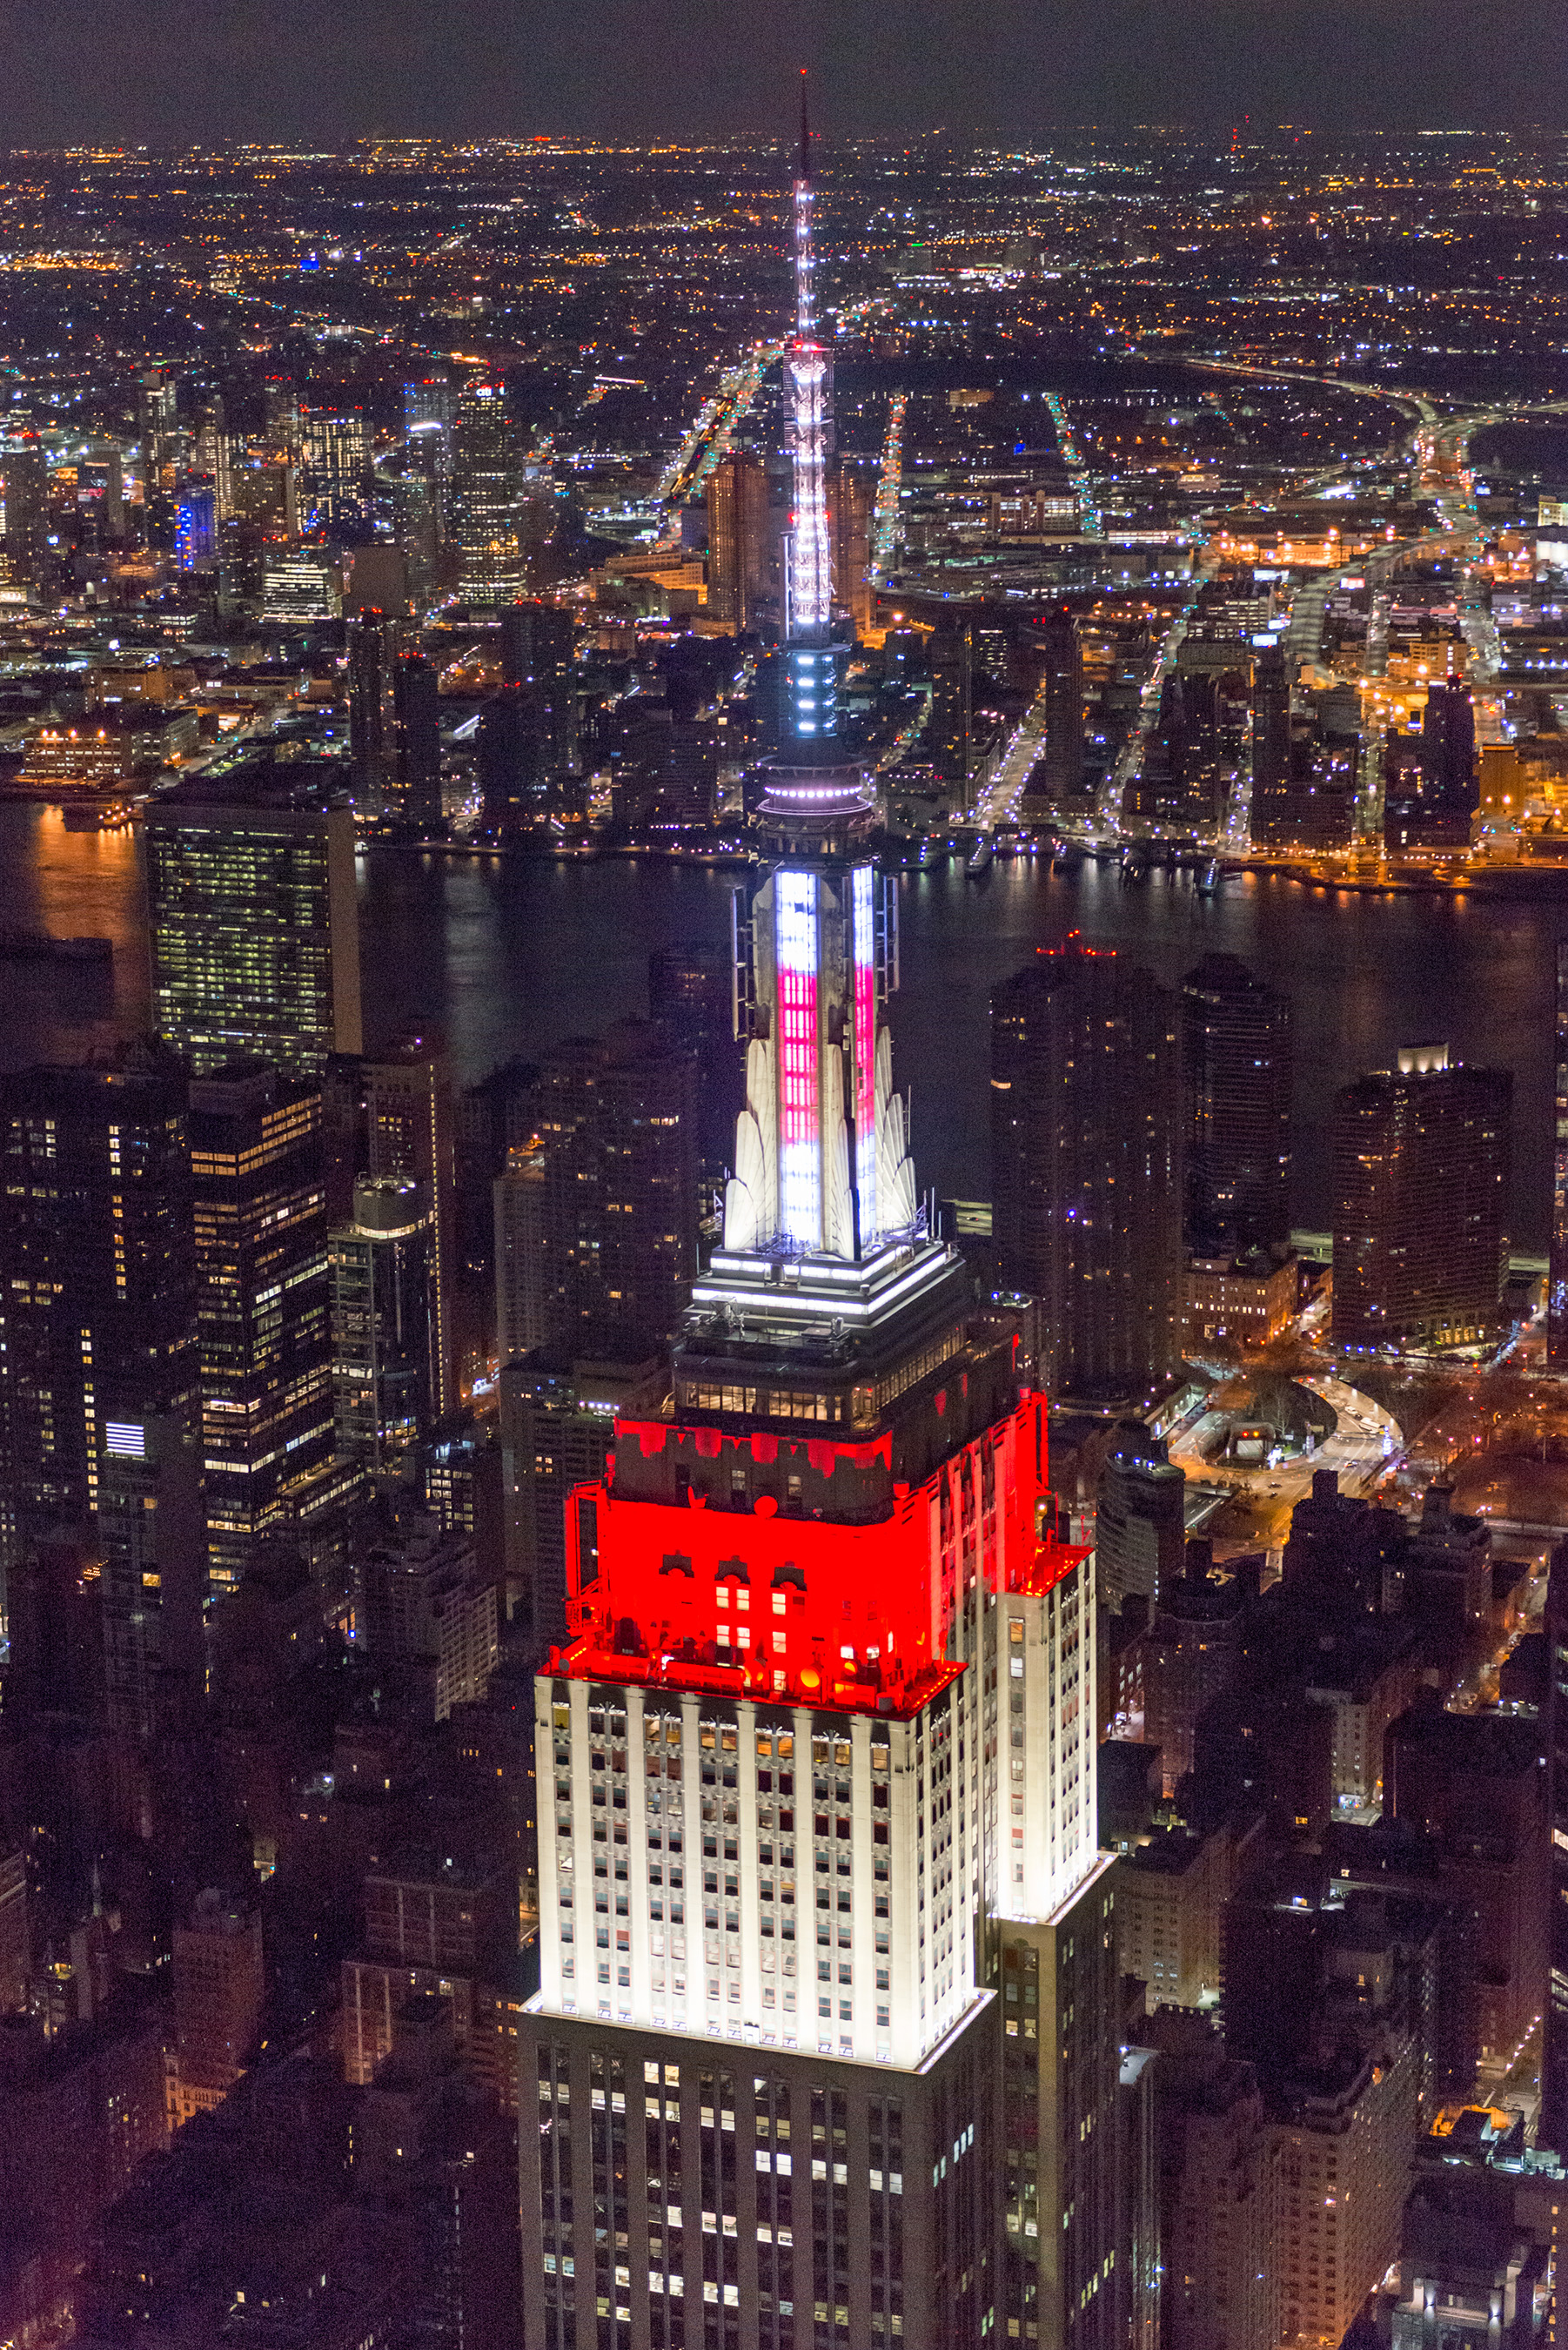 The Empire State Building shines for Japan in honor of the 2018 World Cup